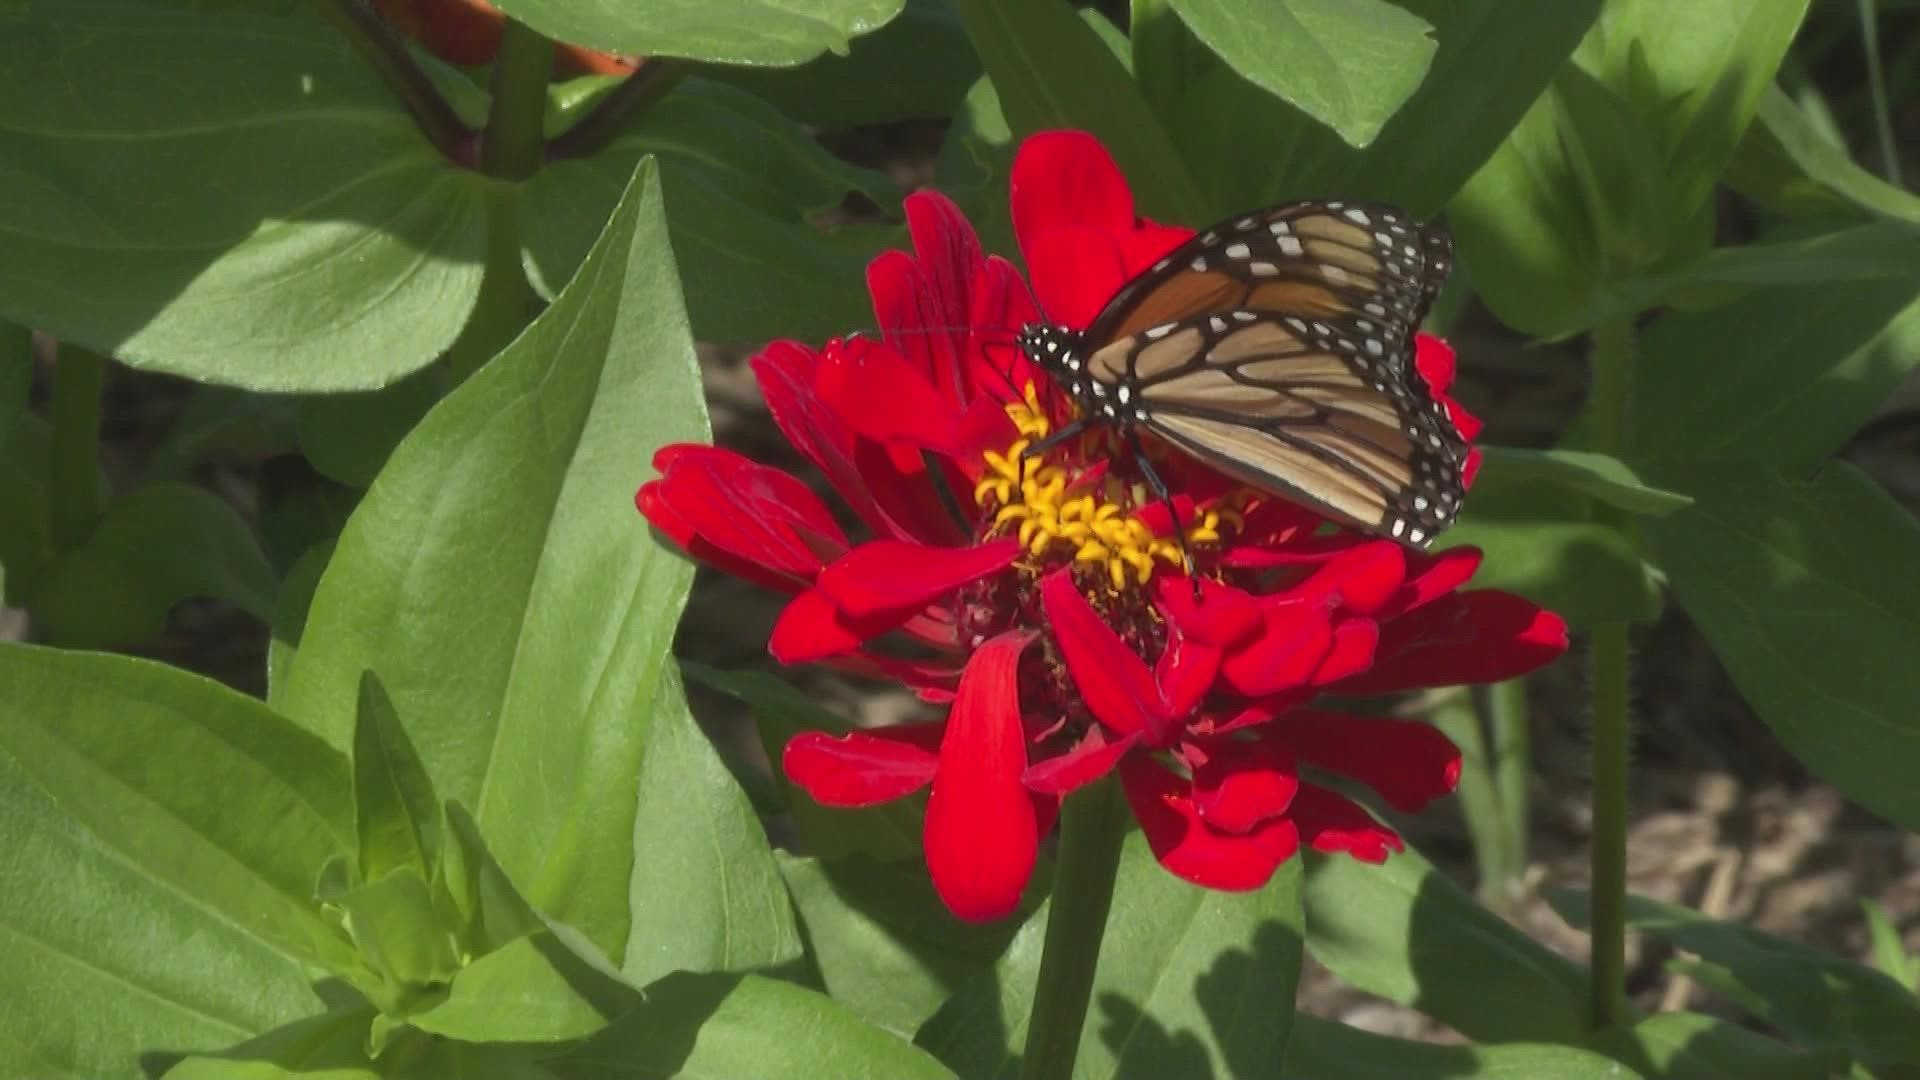 Two women in Berwick are raising monarch butterflies with the hope of keeping them from going extinct, after they recently were deemed endangered.